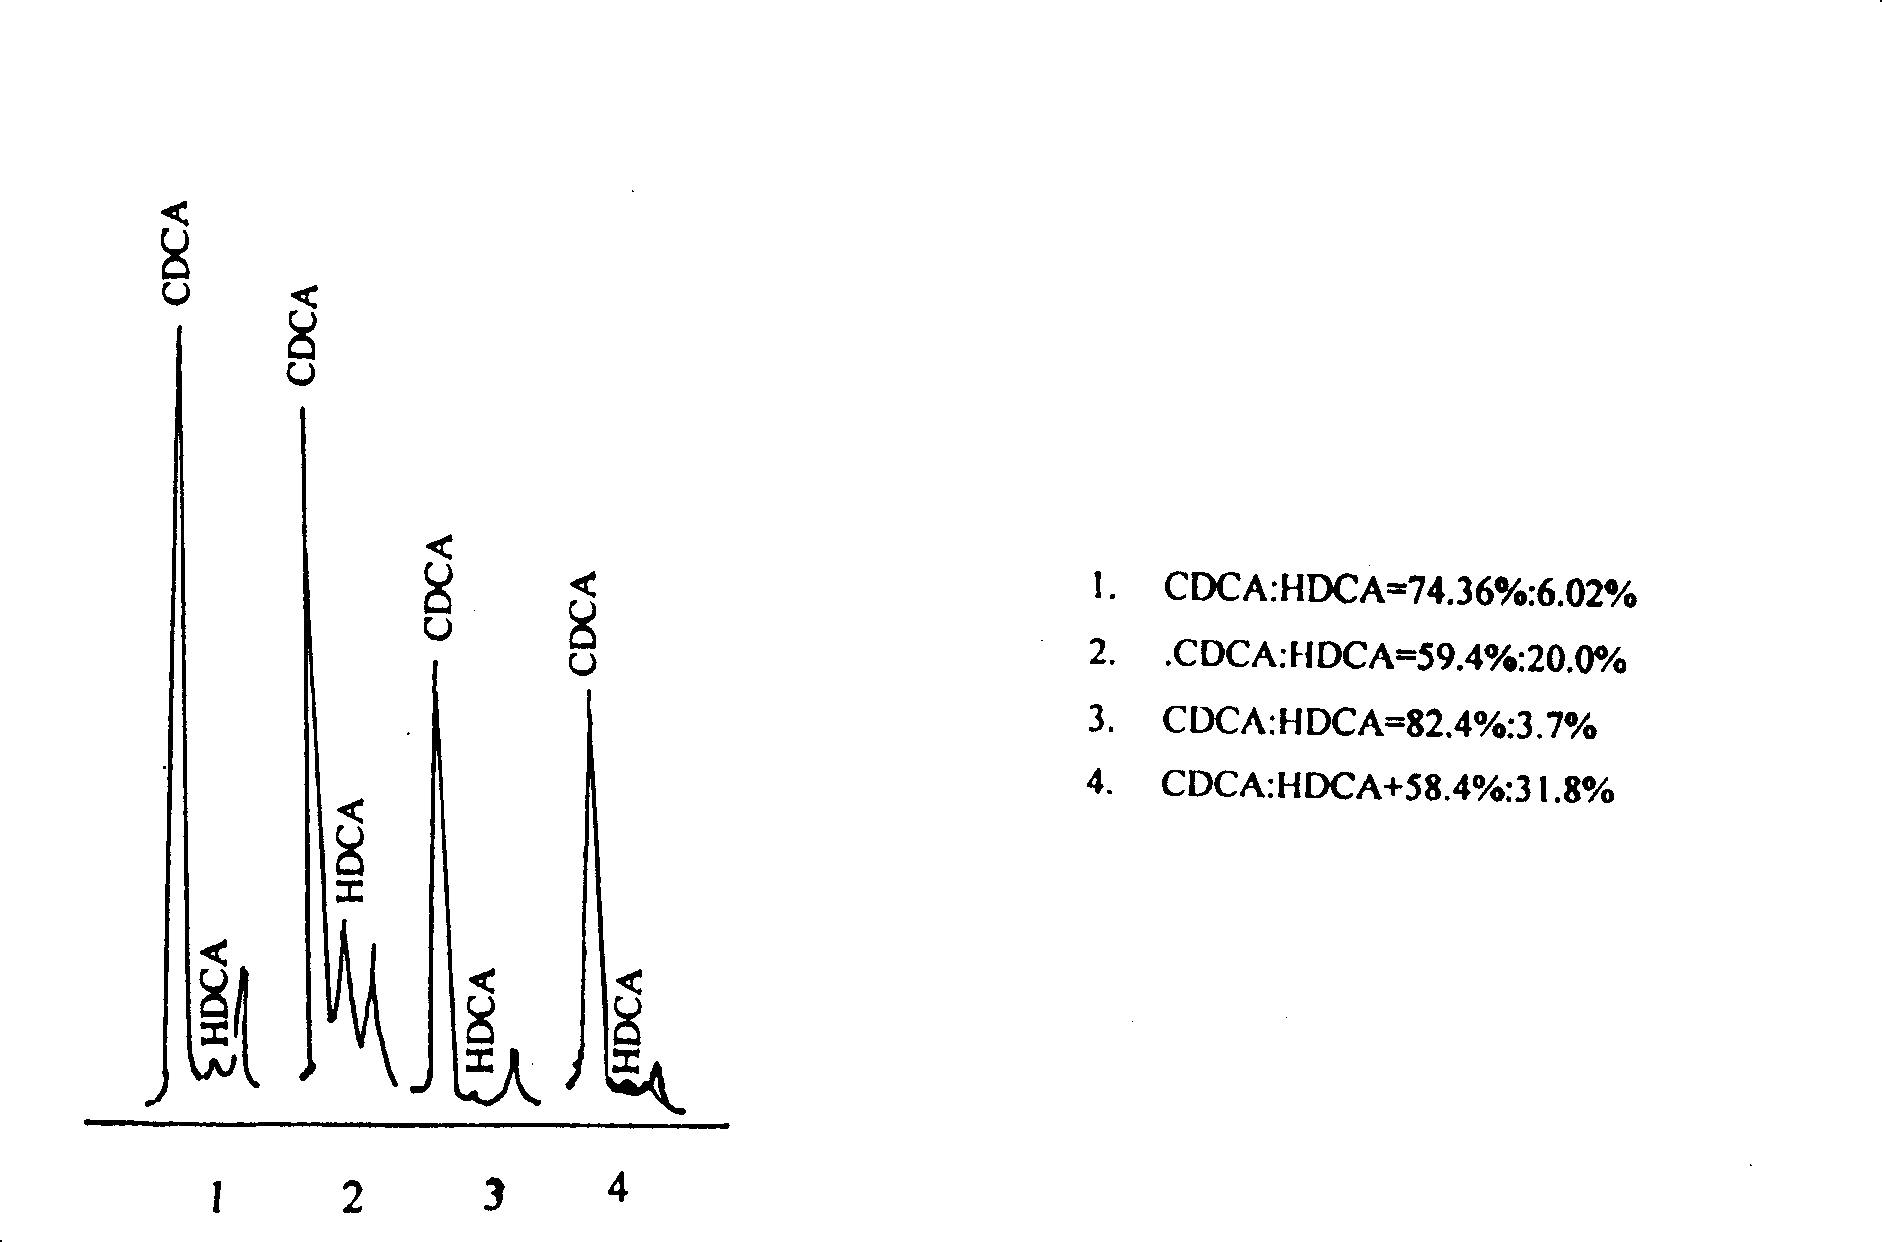 Method for producing ursodeoxycholic acid by using swine bladder as raw material